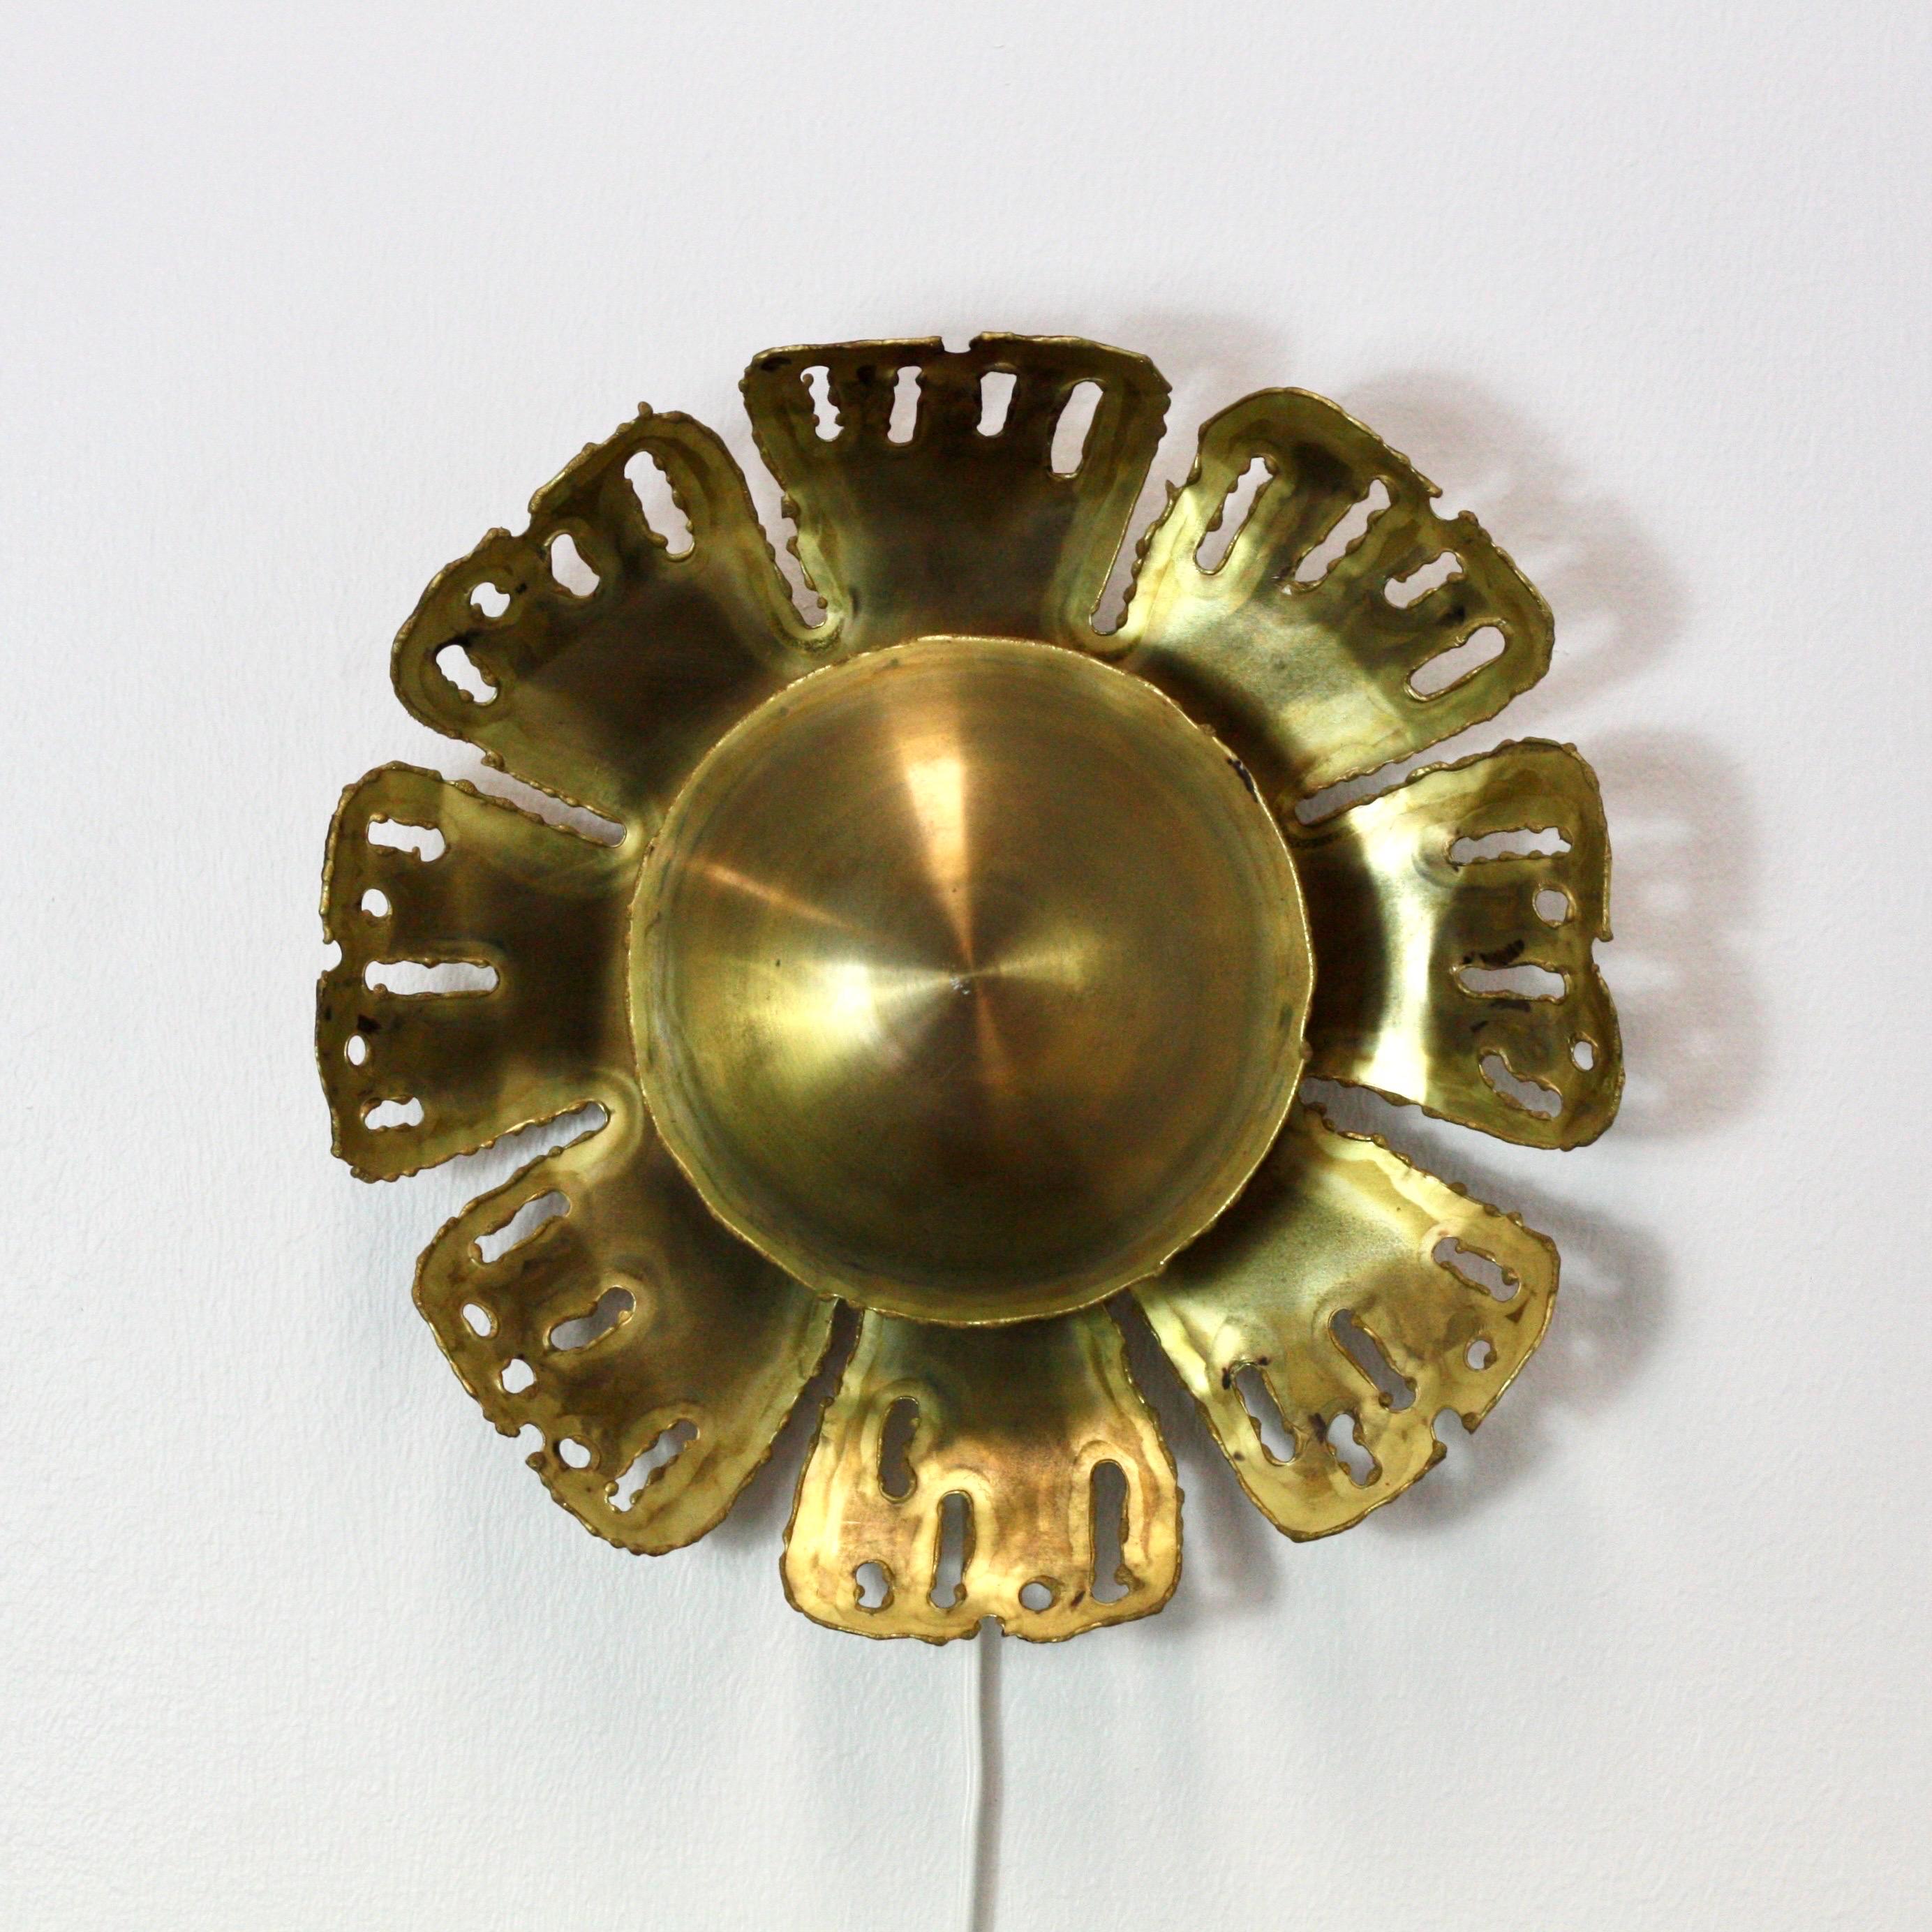 A sun-shaped brass wall lamp designed by Svend Aage Holm Sørensen in the 1960s. This eye-catching design is a true masterpiece and trademark of the Danish designer. 

* A sunflower shaped brass wall sconce
* Designer: Svend Aage Holm Sørensen
*